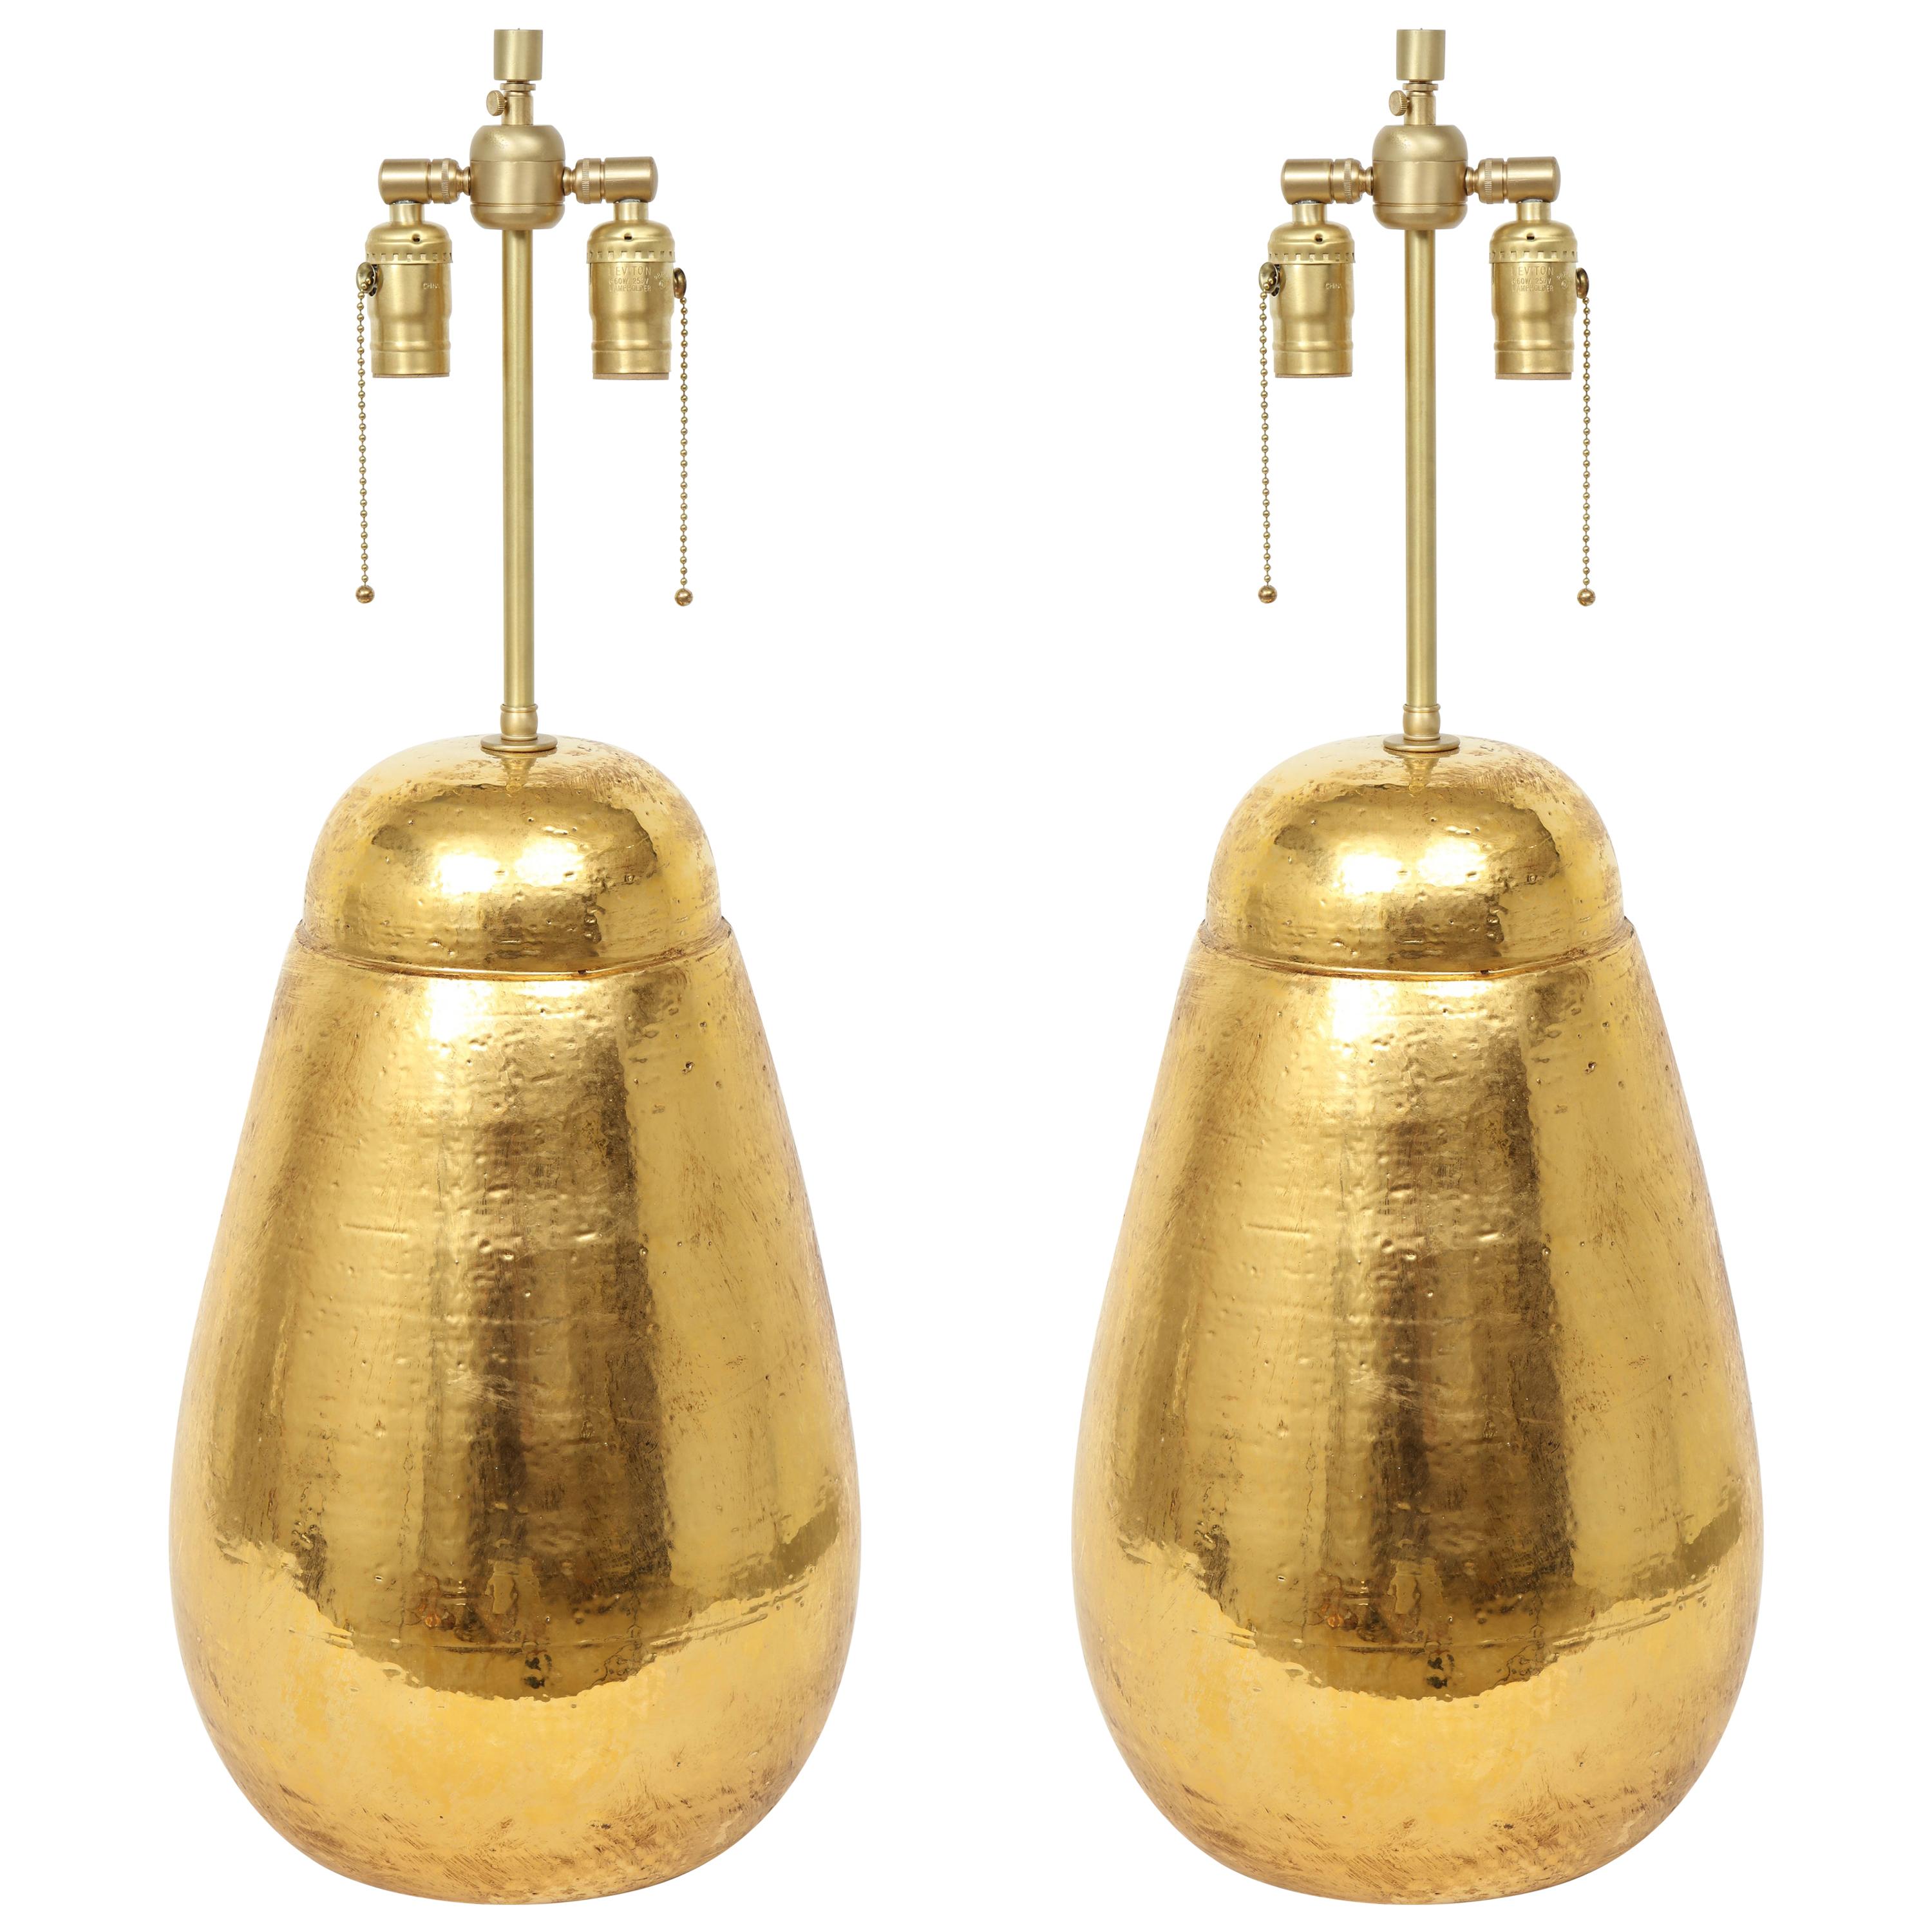 Large Scale, Bitossi Gold Glazed Terracotta Lamps